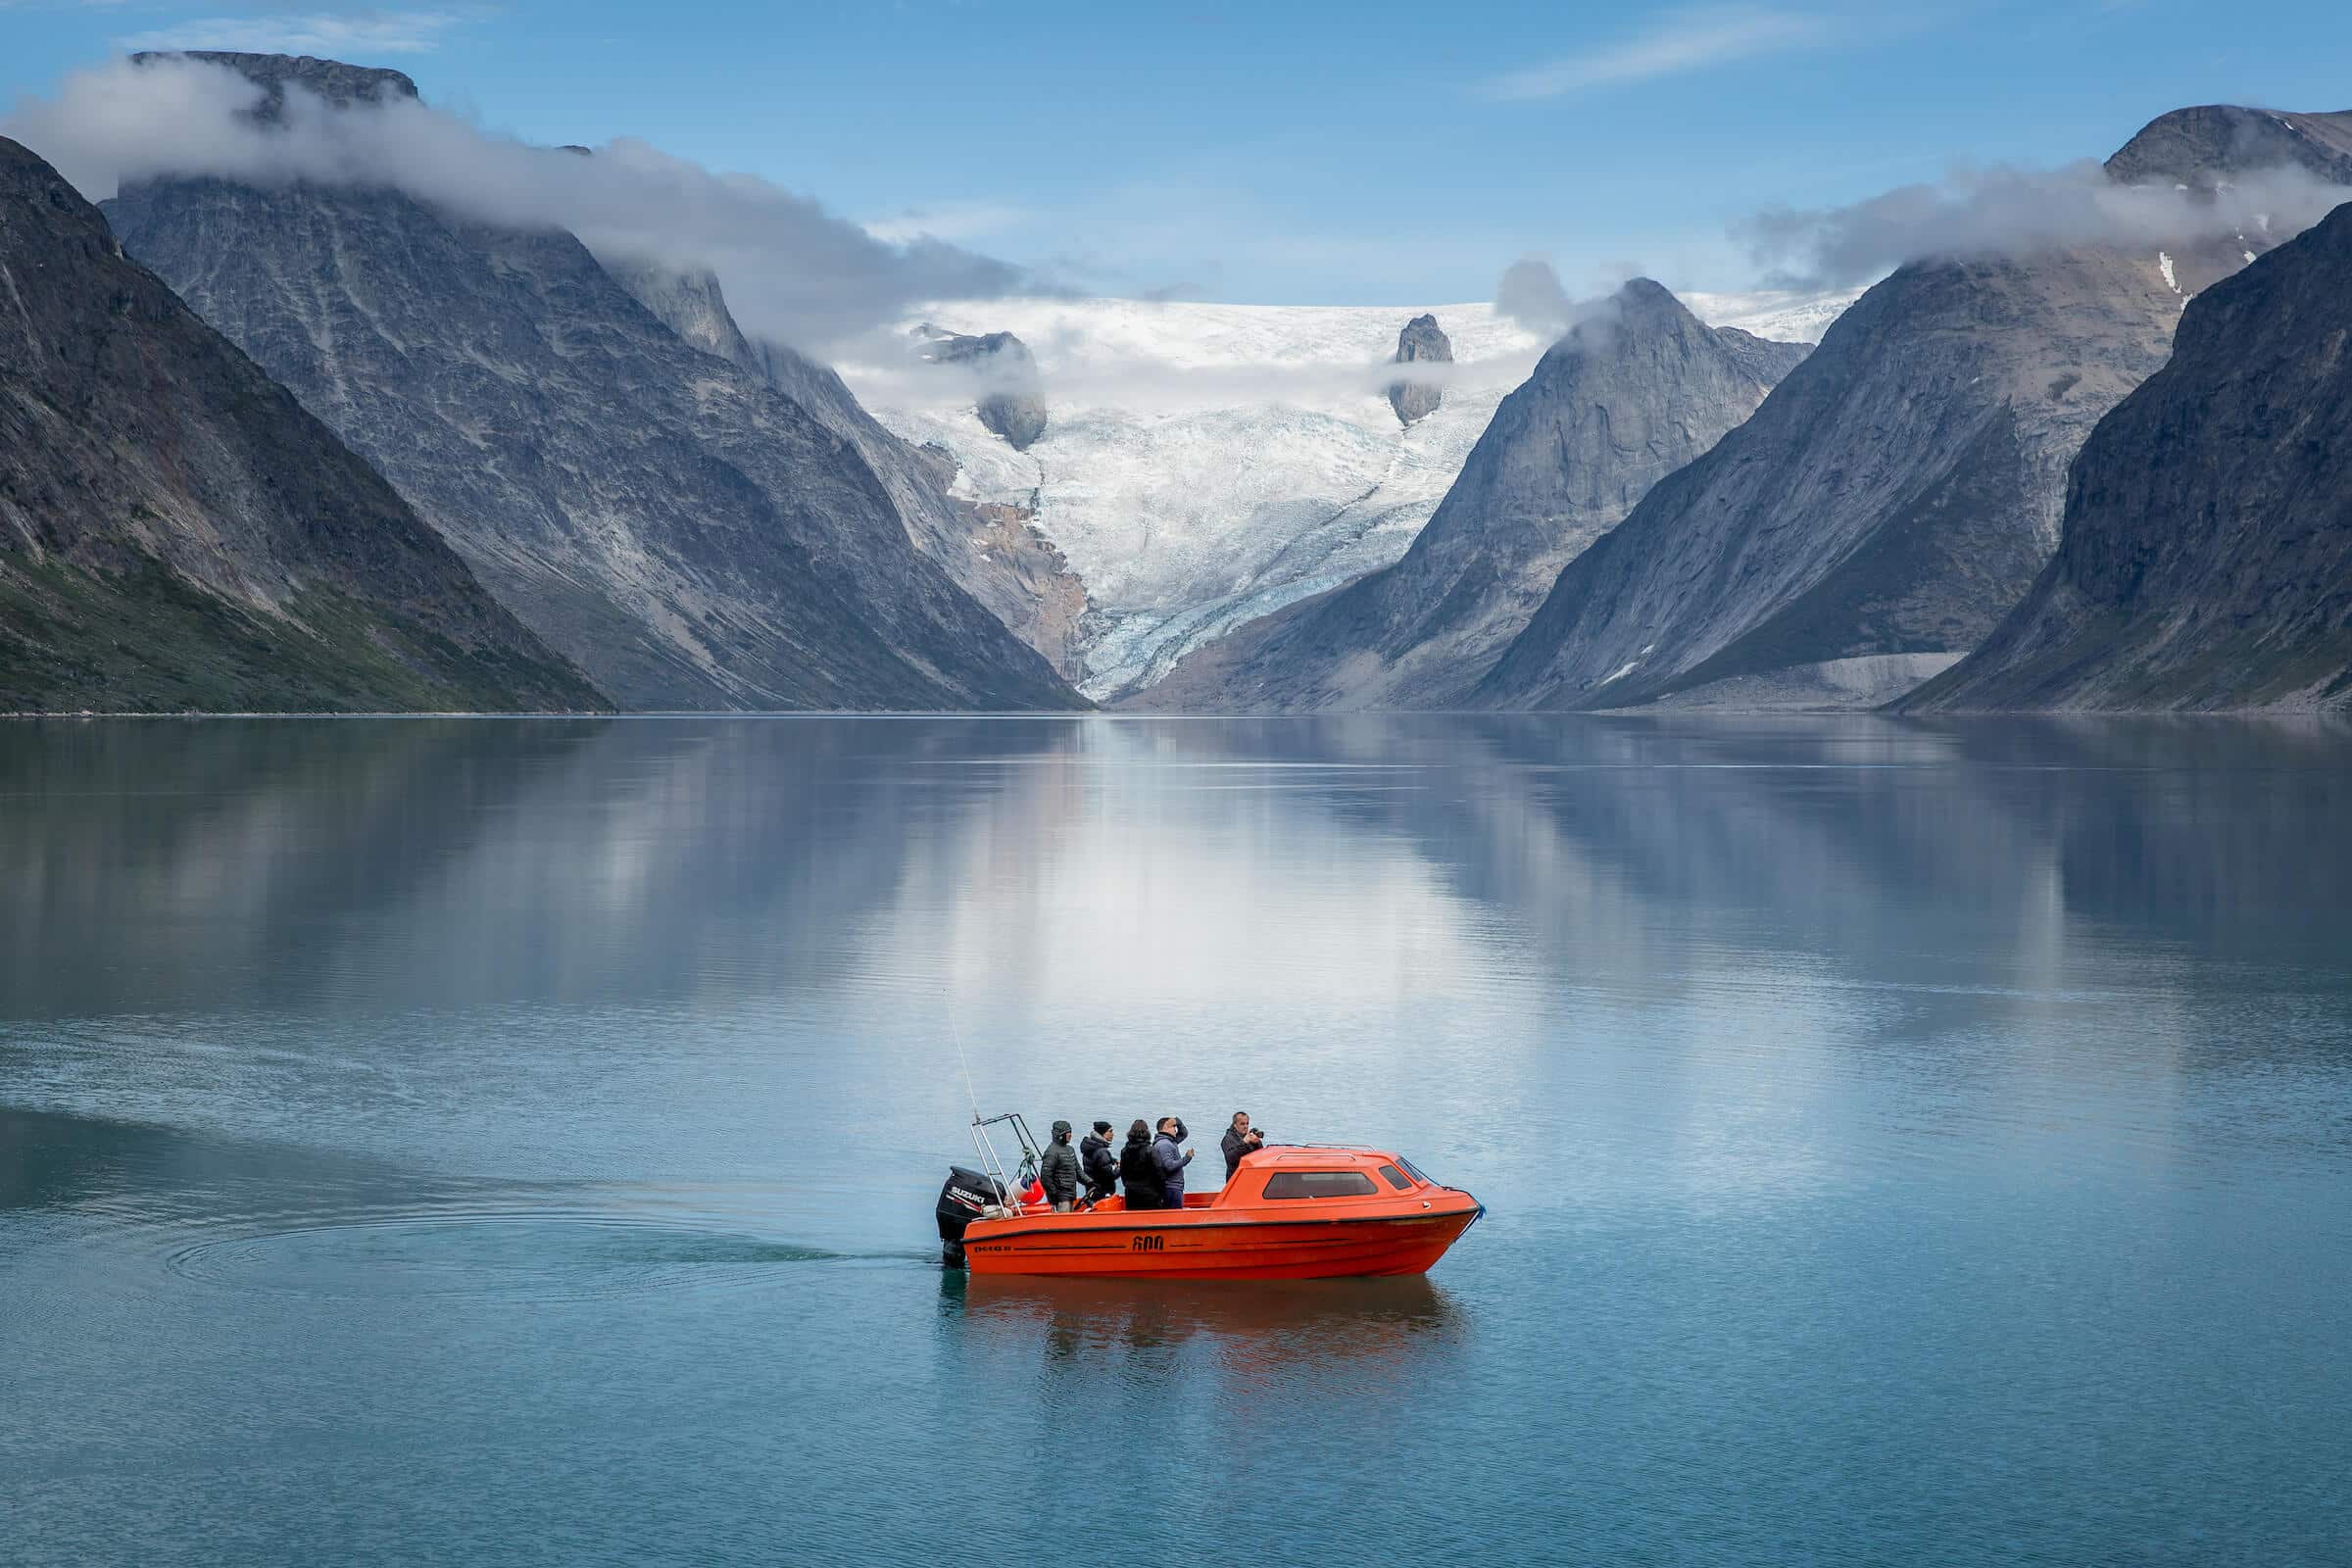 A small passenger boat near the bottom of the Tasermiut fjord in South Greenland. Photo by Mads Pihl - Visit Greenland